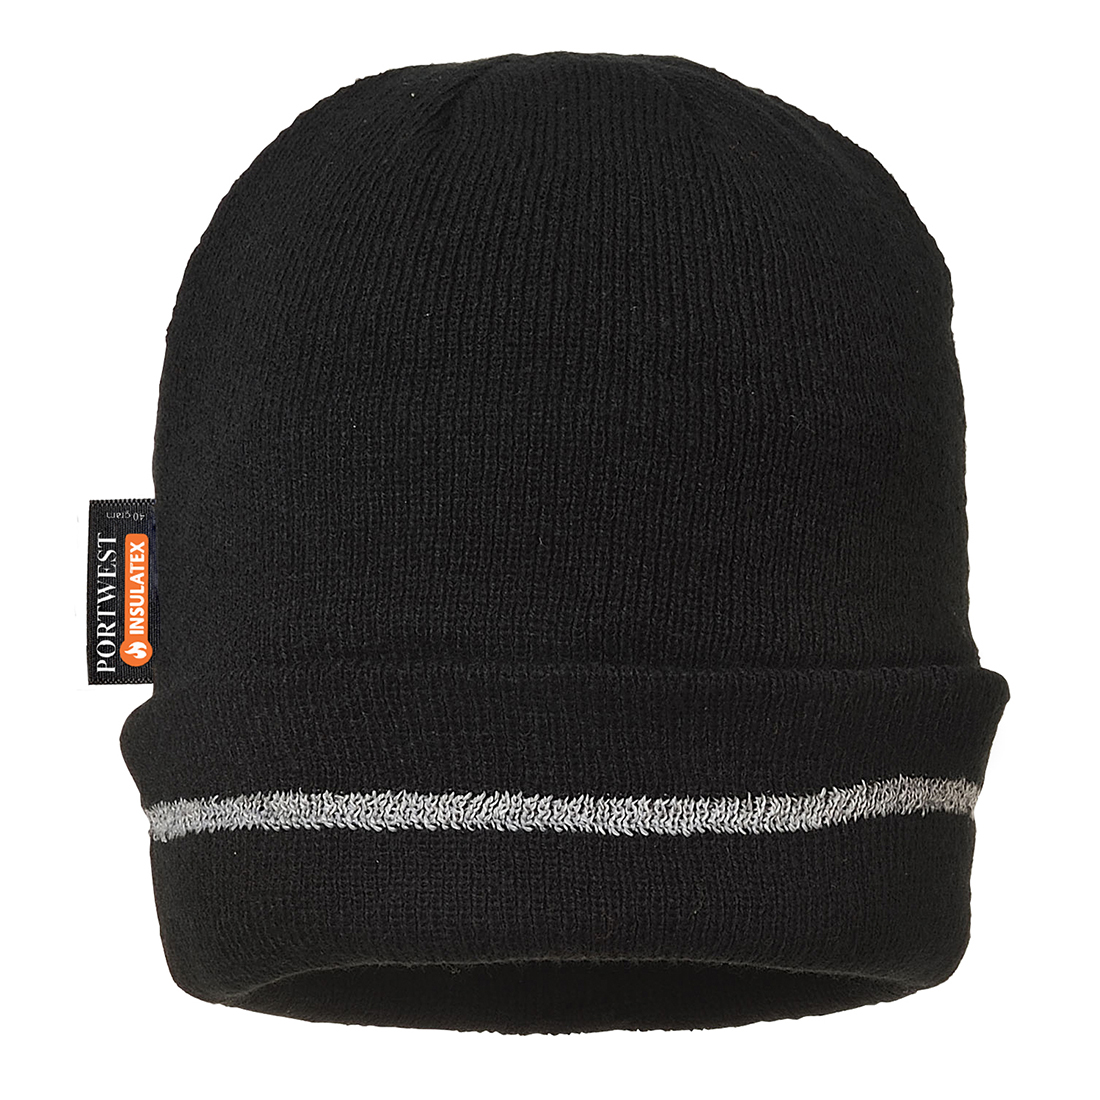 Portwest B023 - Reflective Trim Knit Hat Insulatex Lined